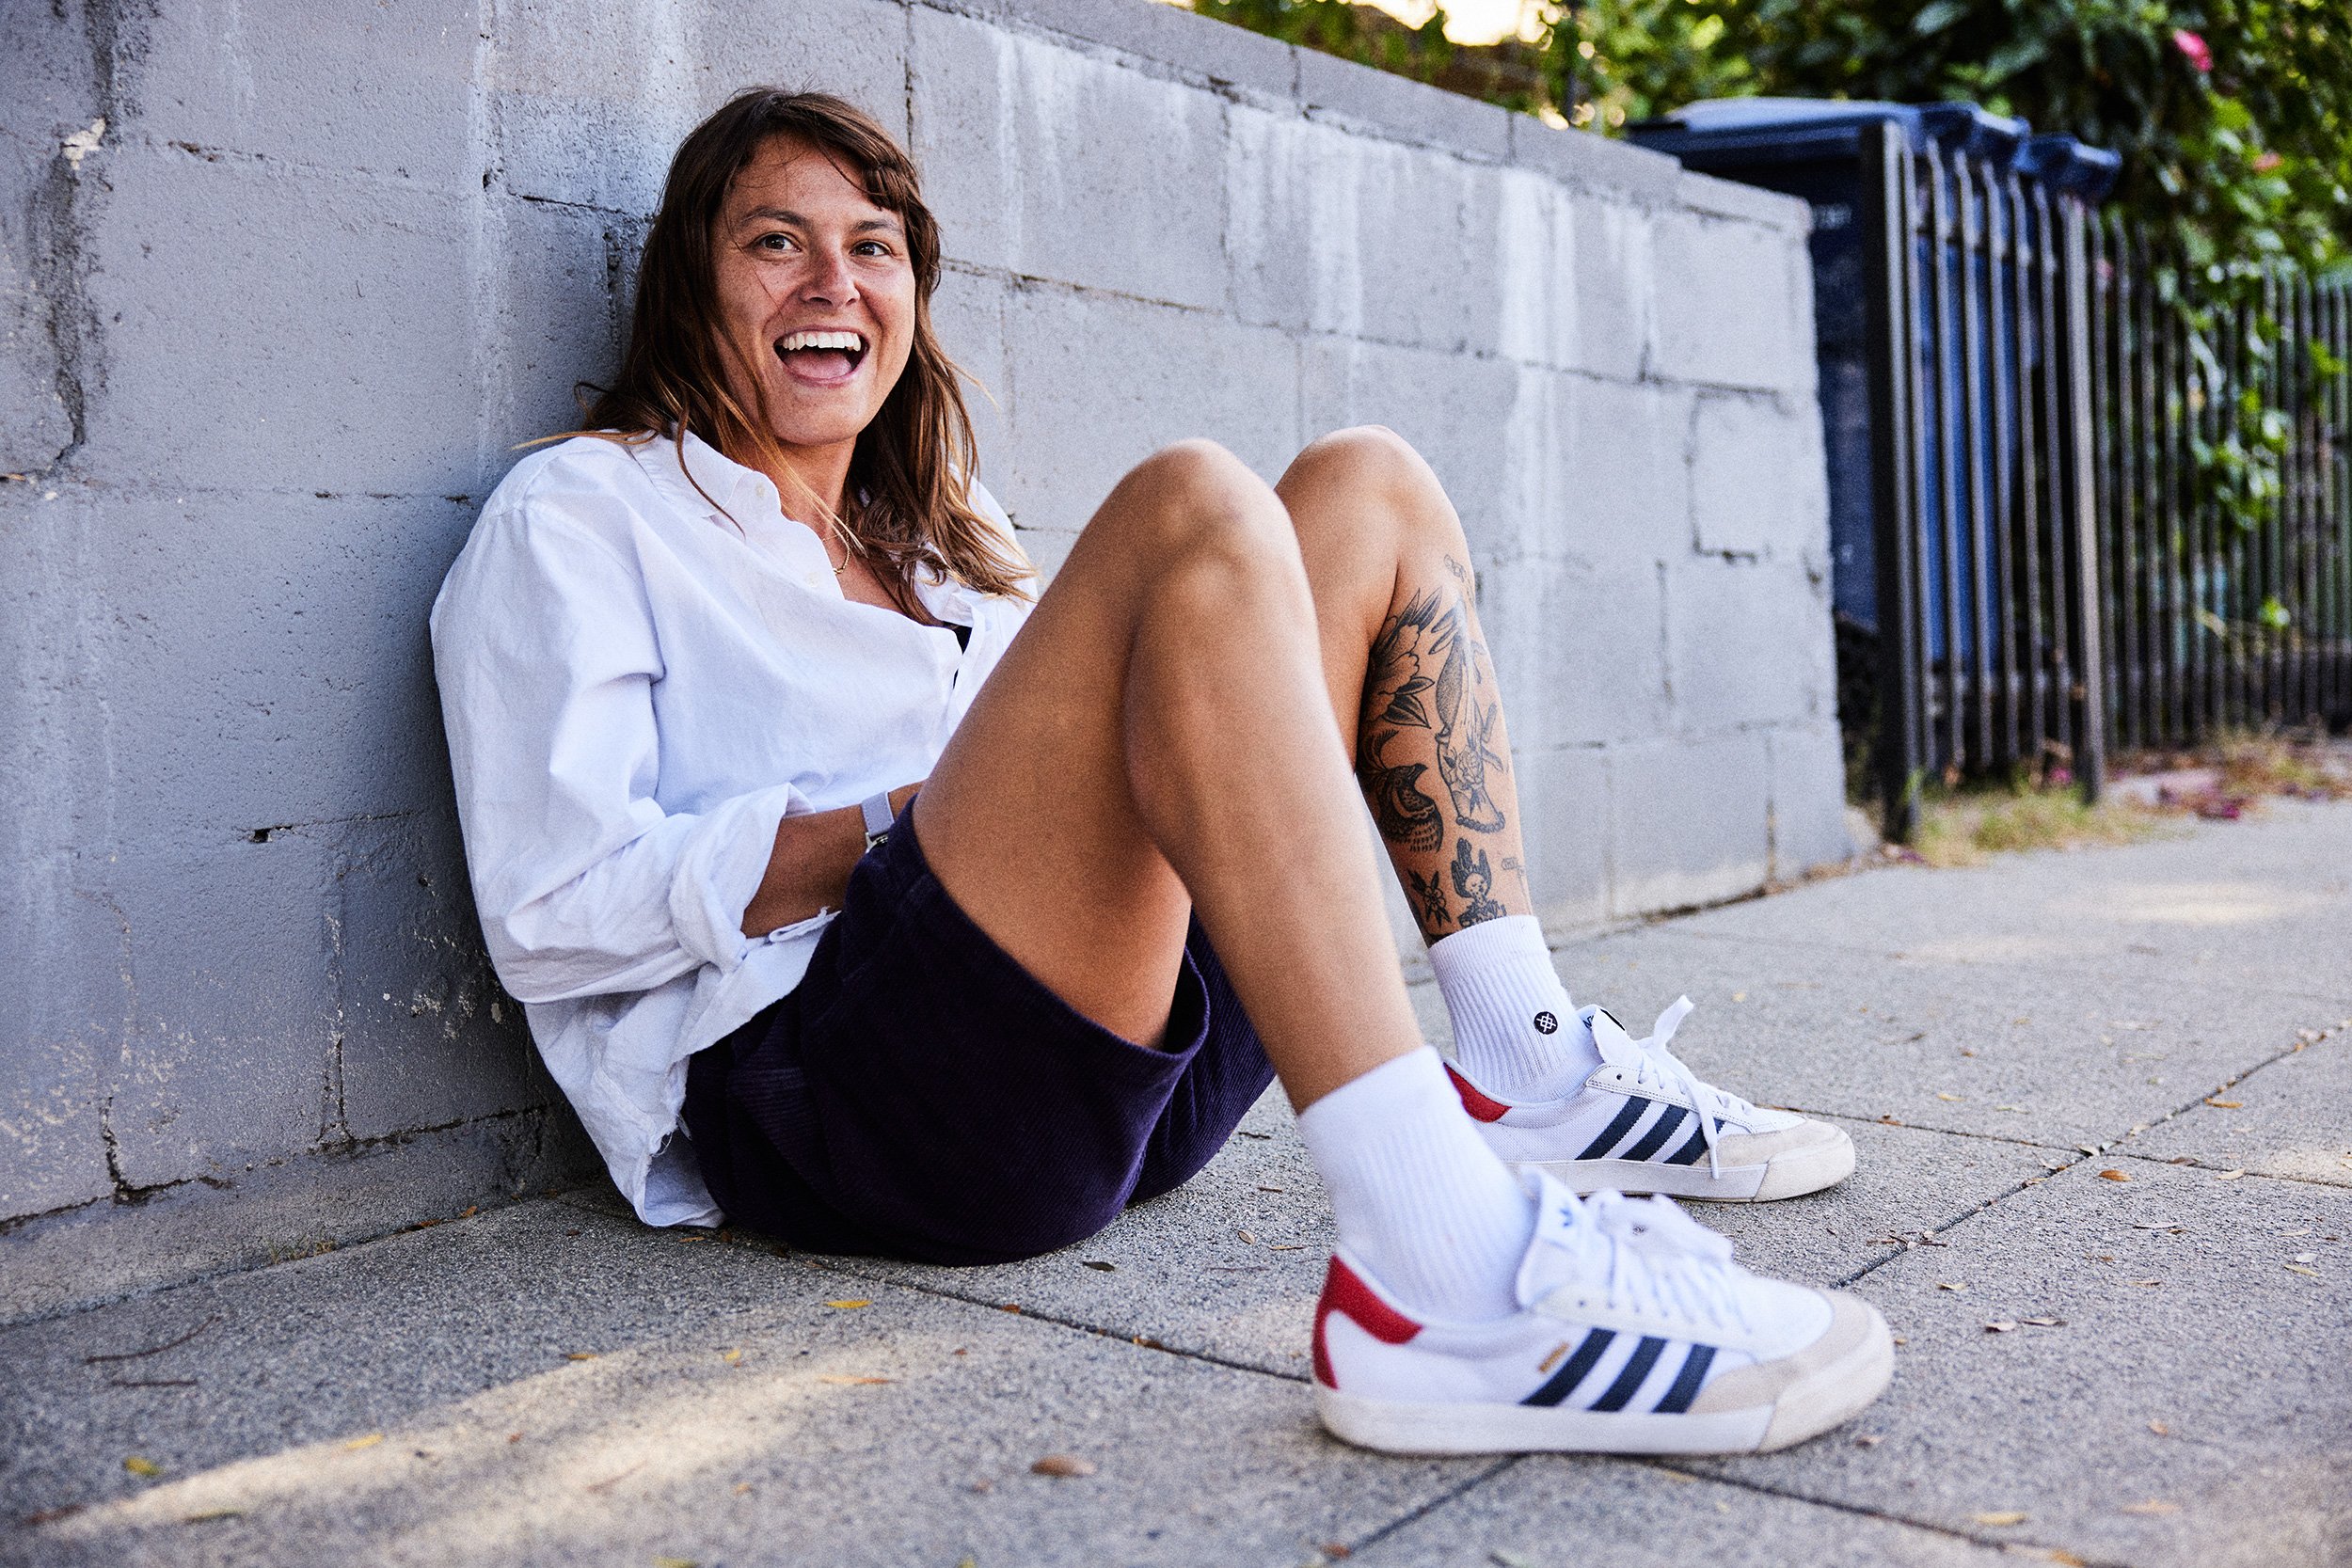 Nora Vasconcello's New Adidas Pro Shoe Drops - Get Em' Fast! — Girl NOT A 4 Word